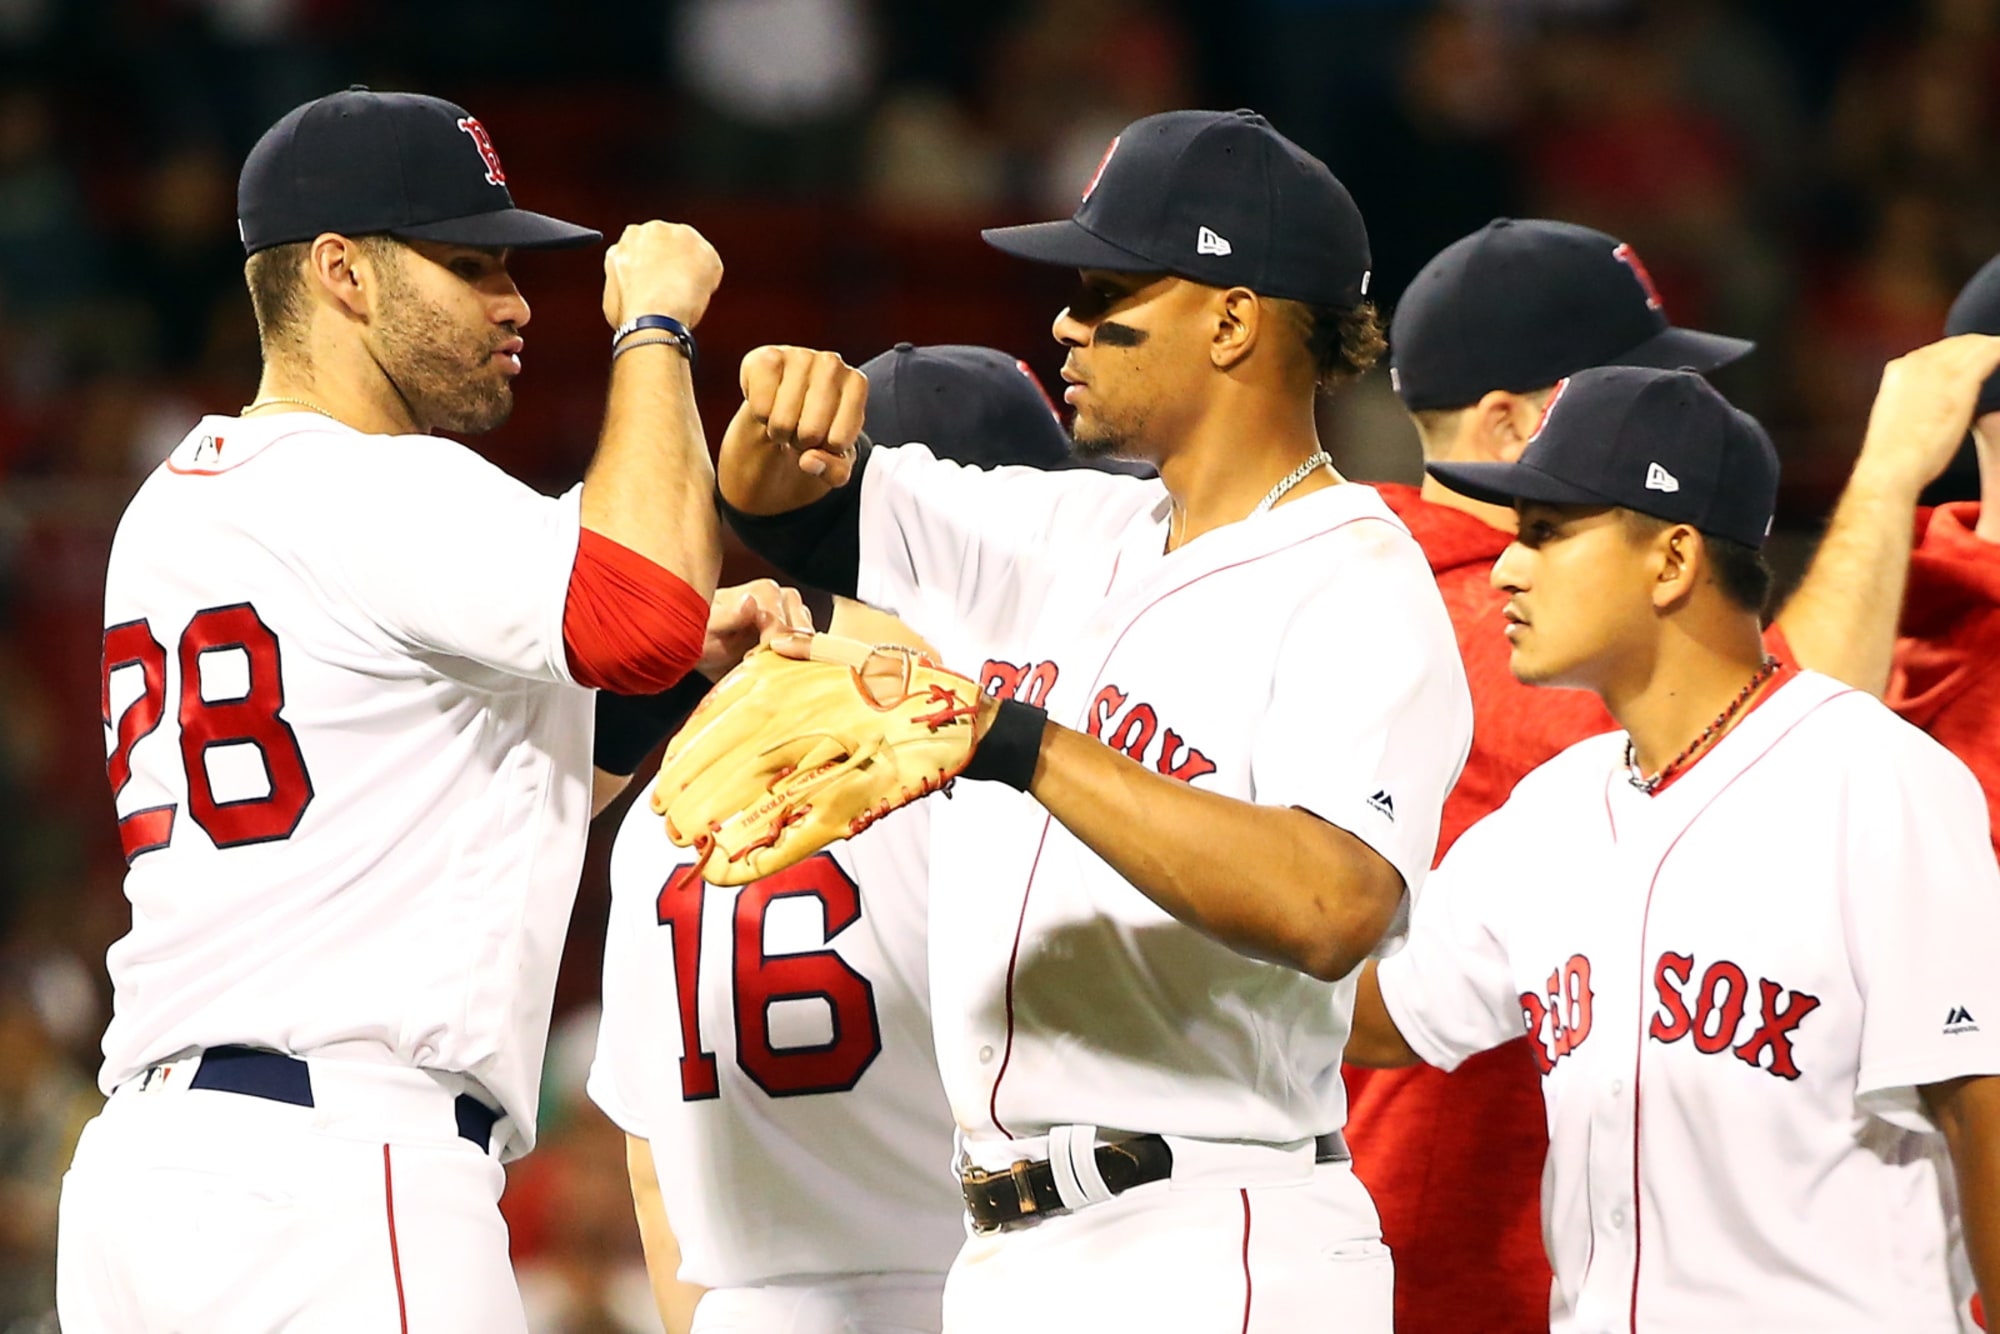 Red Sox win total is on a franchise record pace through 102 games